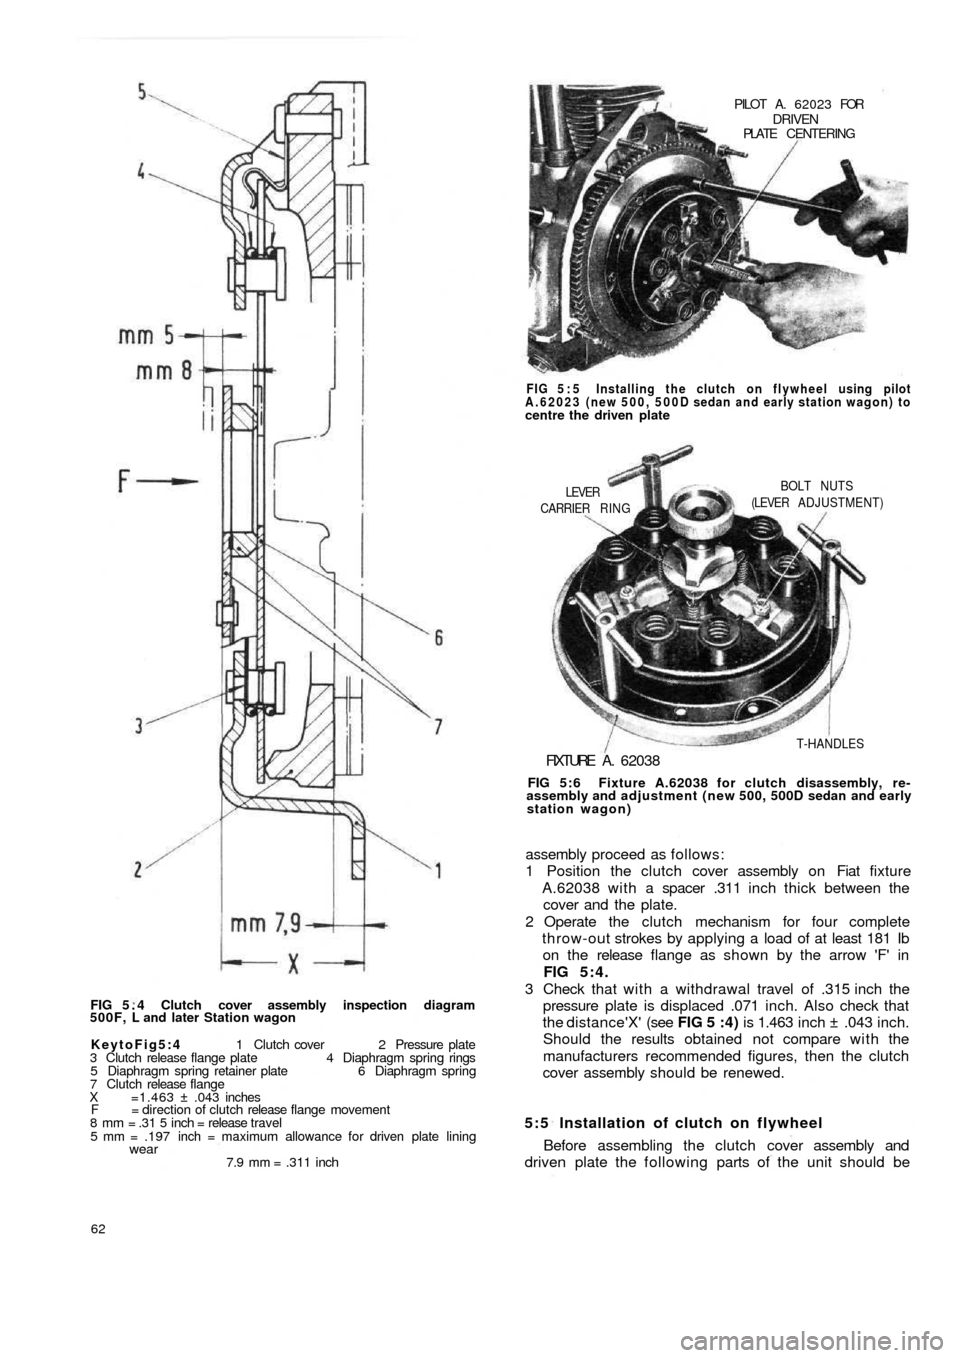 FIAT 500 1970 1.G Workshop Manual FIG 5 . 4  Clutch cover assembly inspection diagram
500F, L and later Station wagon
KeytoFig5:4 1 Clutch cover 2 Pressure plate
3 Clutch release flange plate 4 Diaphragm spring rings
5 Diaphragm sprin